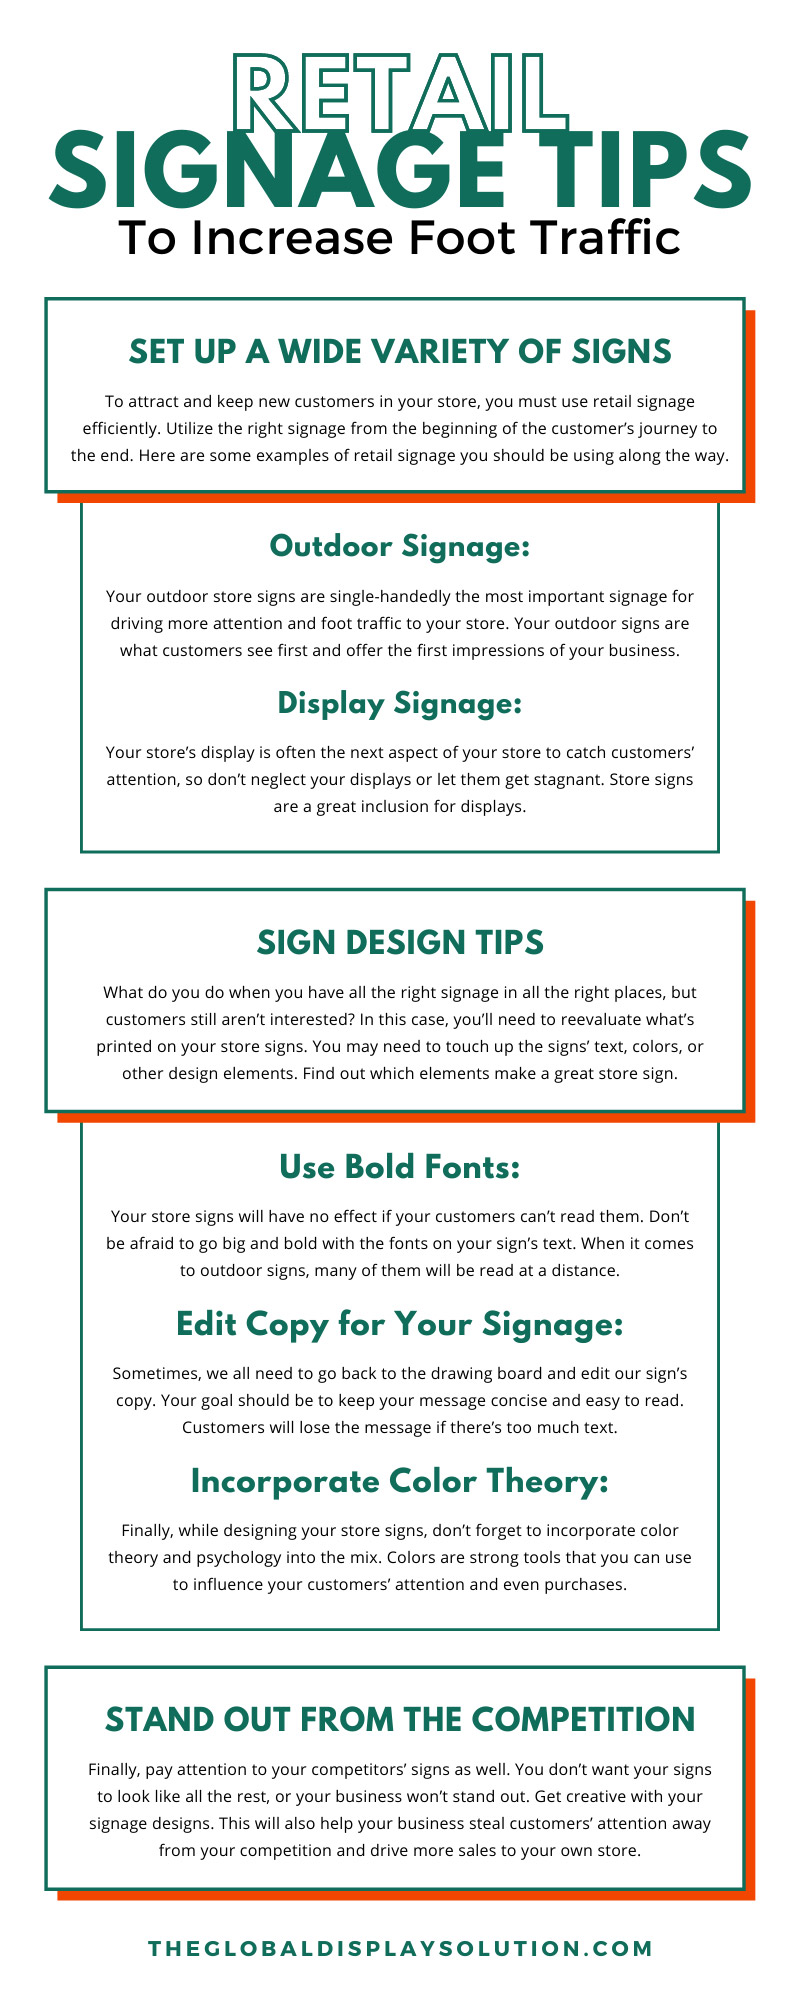 10+ Retail Signage Tips To Increase Foot Traffic